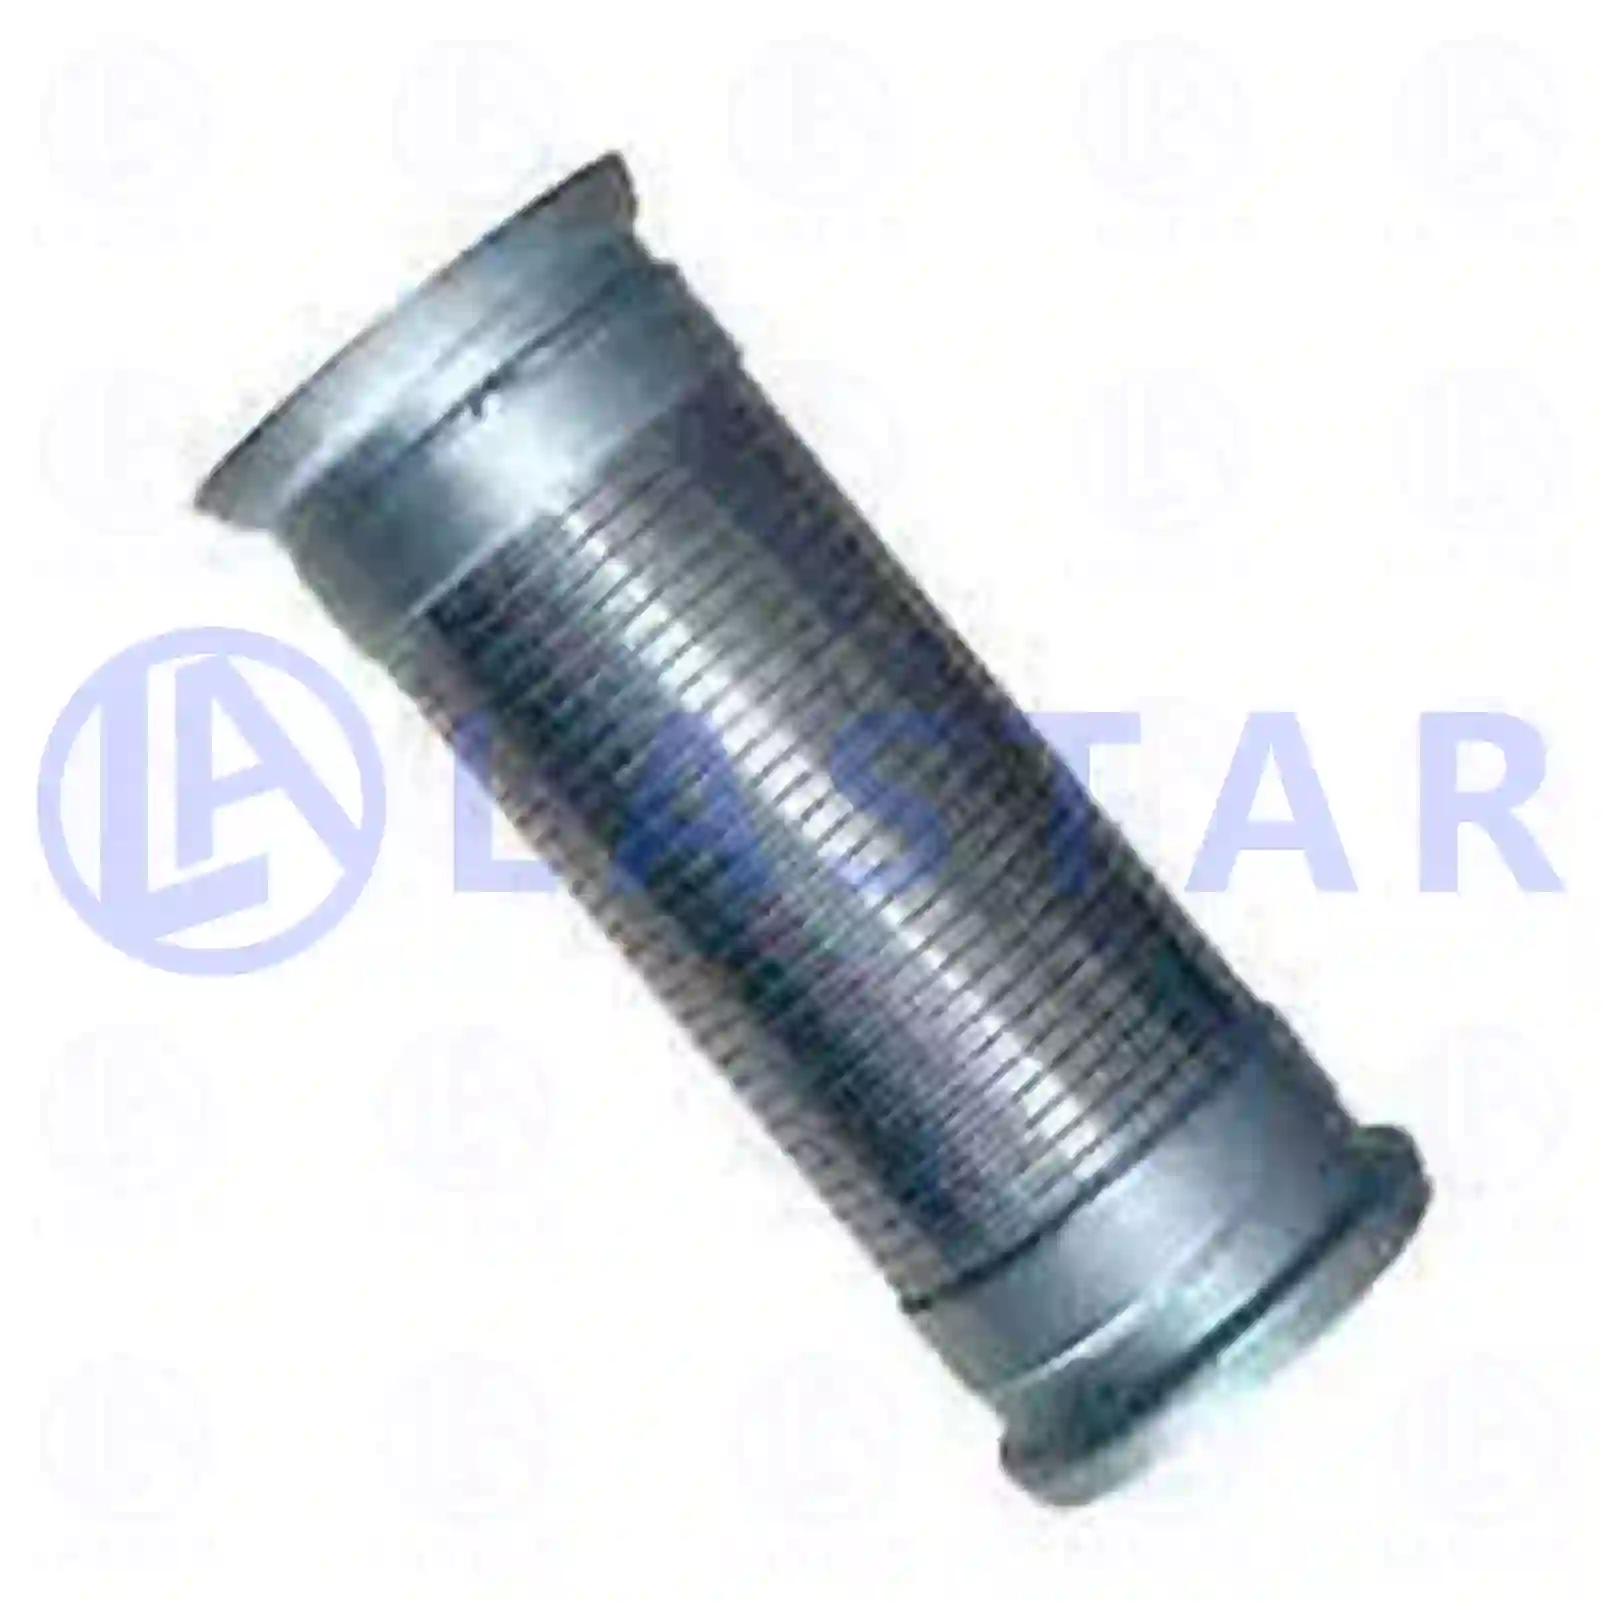  Flexible pipe, stainless steel || Lastar Spare Part | Truck Spare Parts, Auotomotive Spare Parts